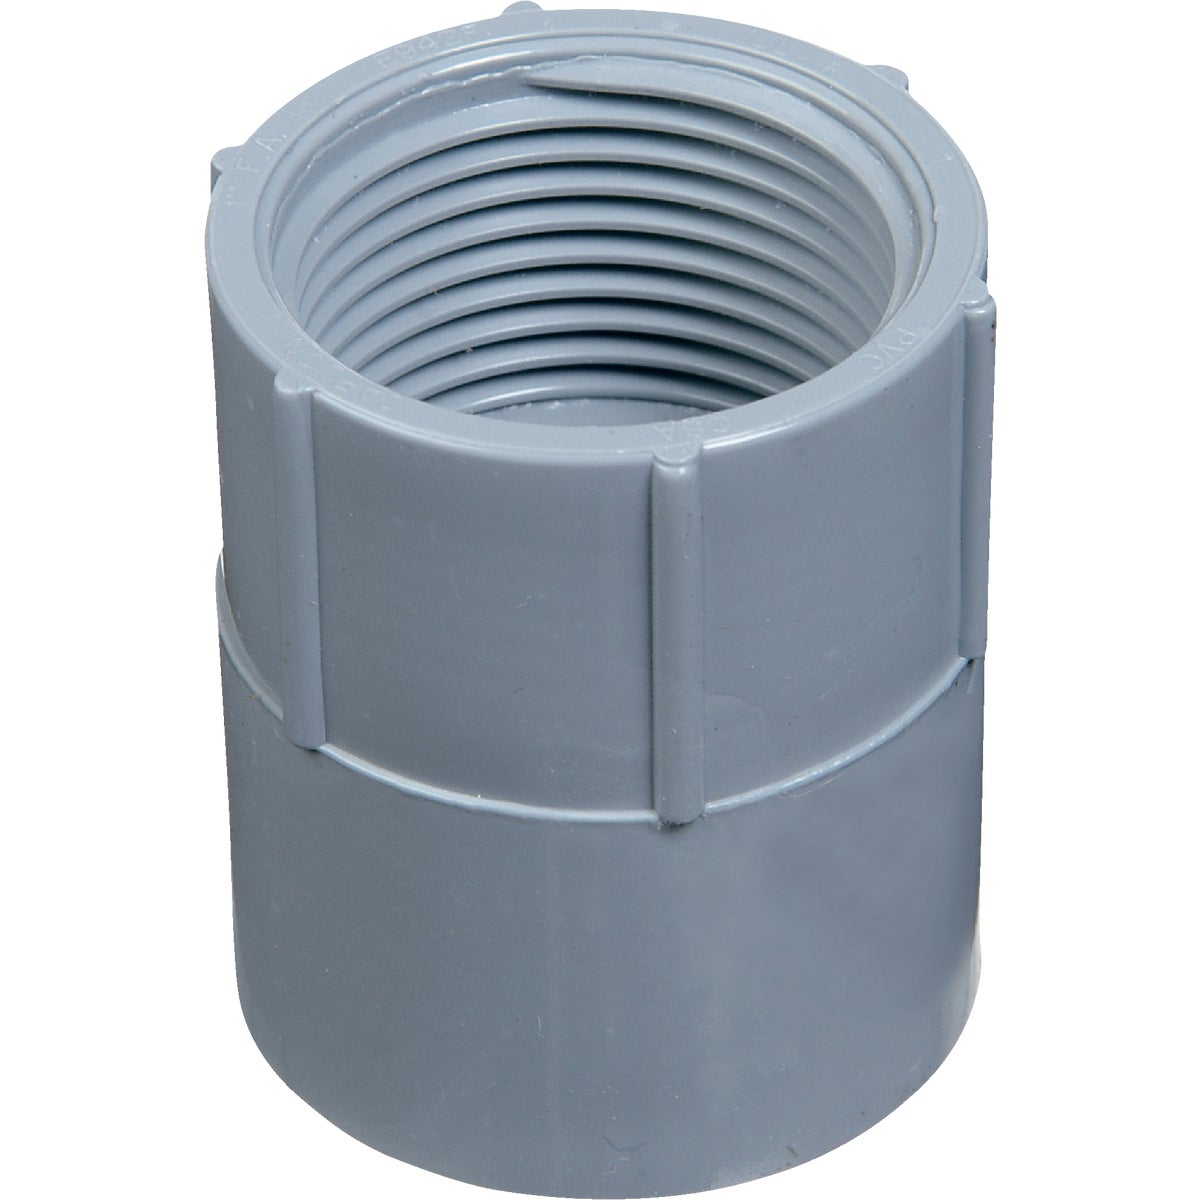 Item 507464, Adapter ideal for adapting PVC (polyvinyl chloride) conduit to threaded 